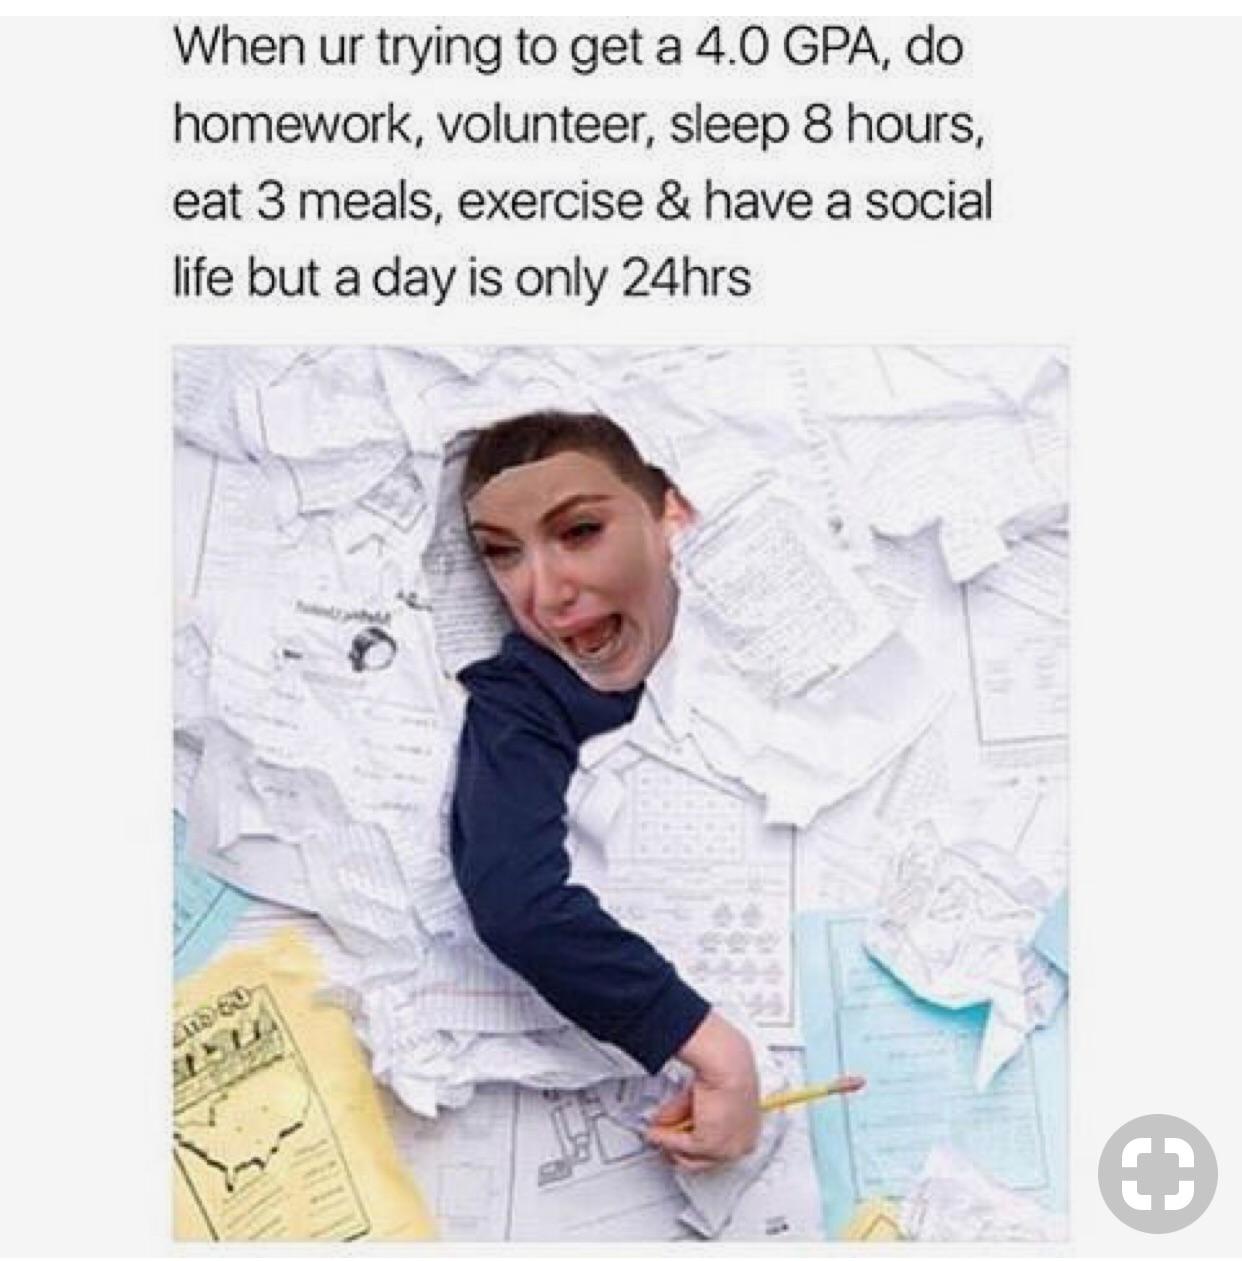 r/collegememes- college dank memes - human behavior - When ur trying to get a 4.0 Gpa, do homework, volunteer, sleep 8 hours, eat 3 meals, exercise & have a social life but a day is only 24hrs Cz